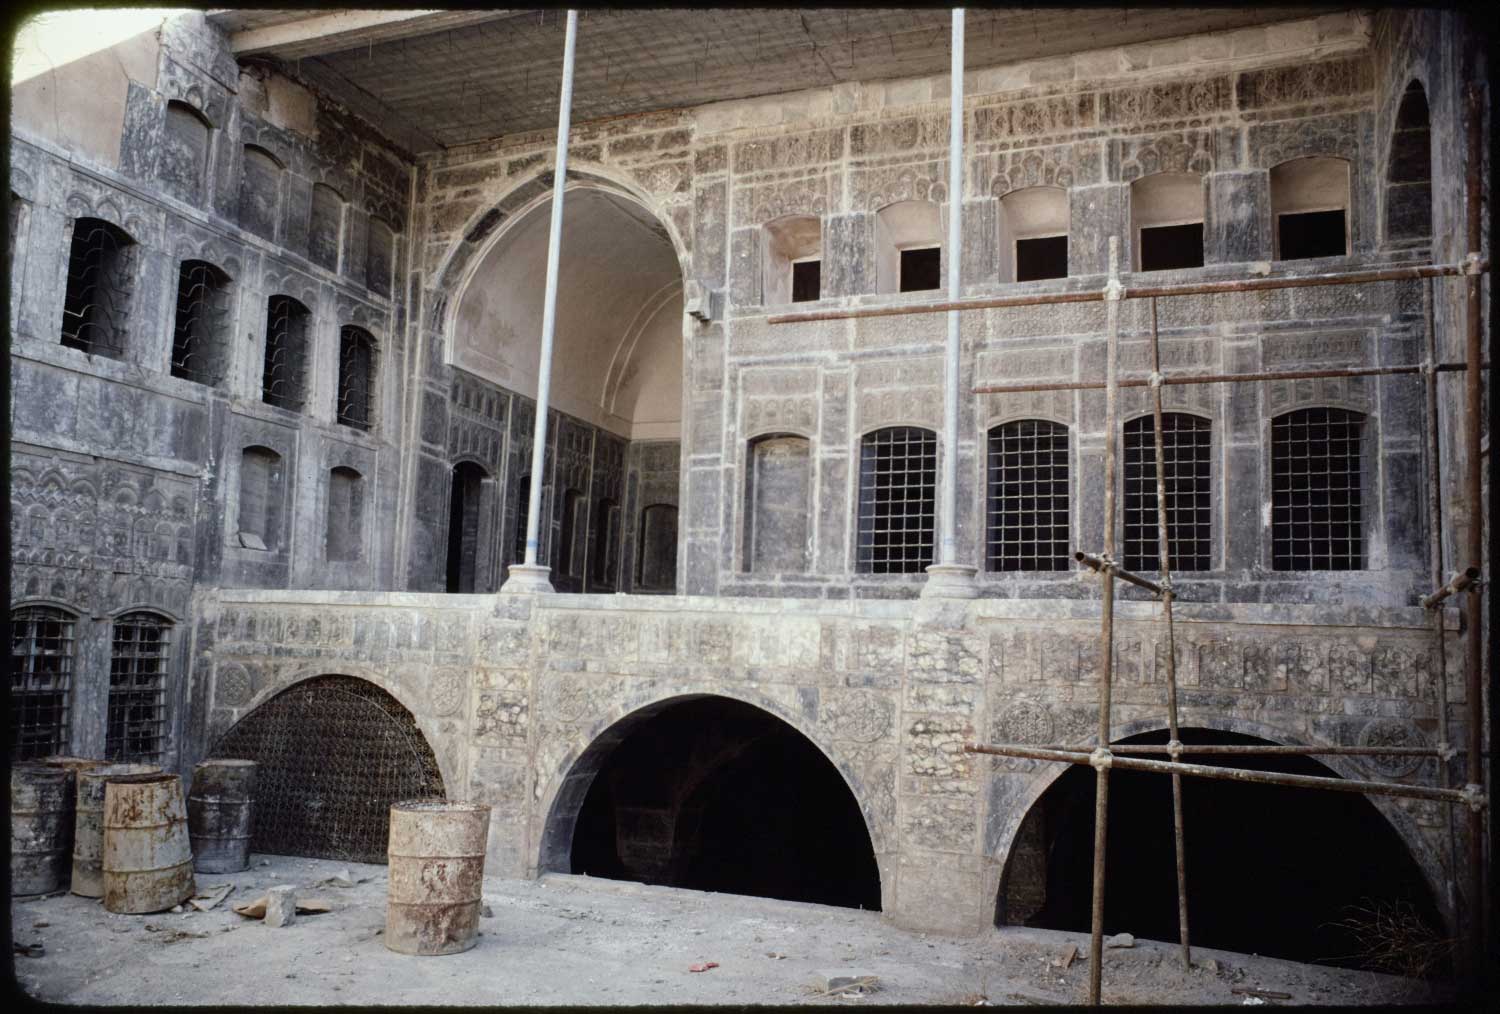 Exterior view of porch and qa'a.